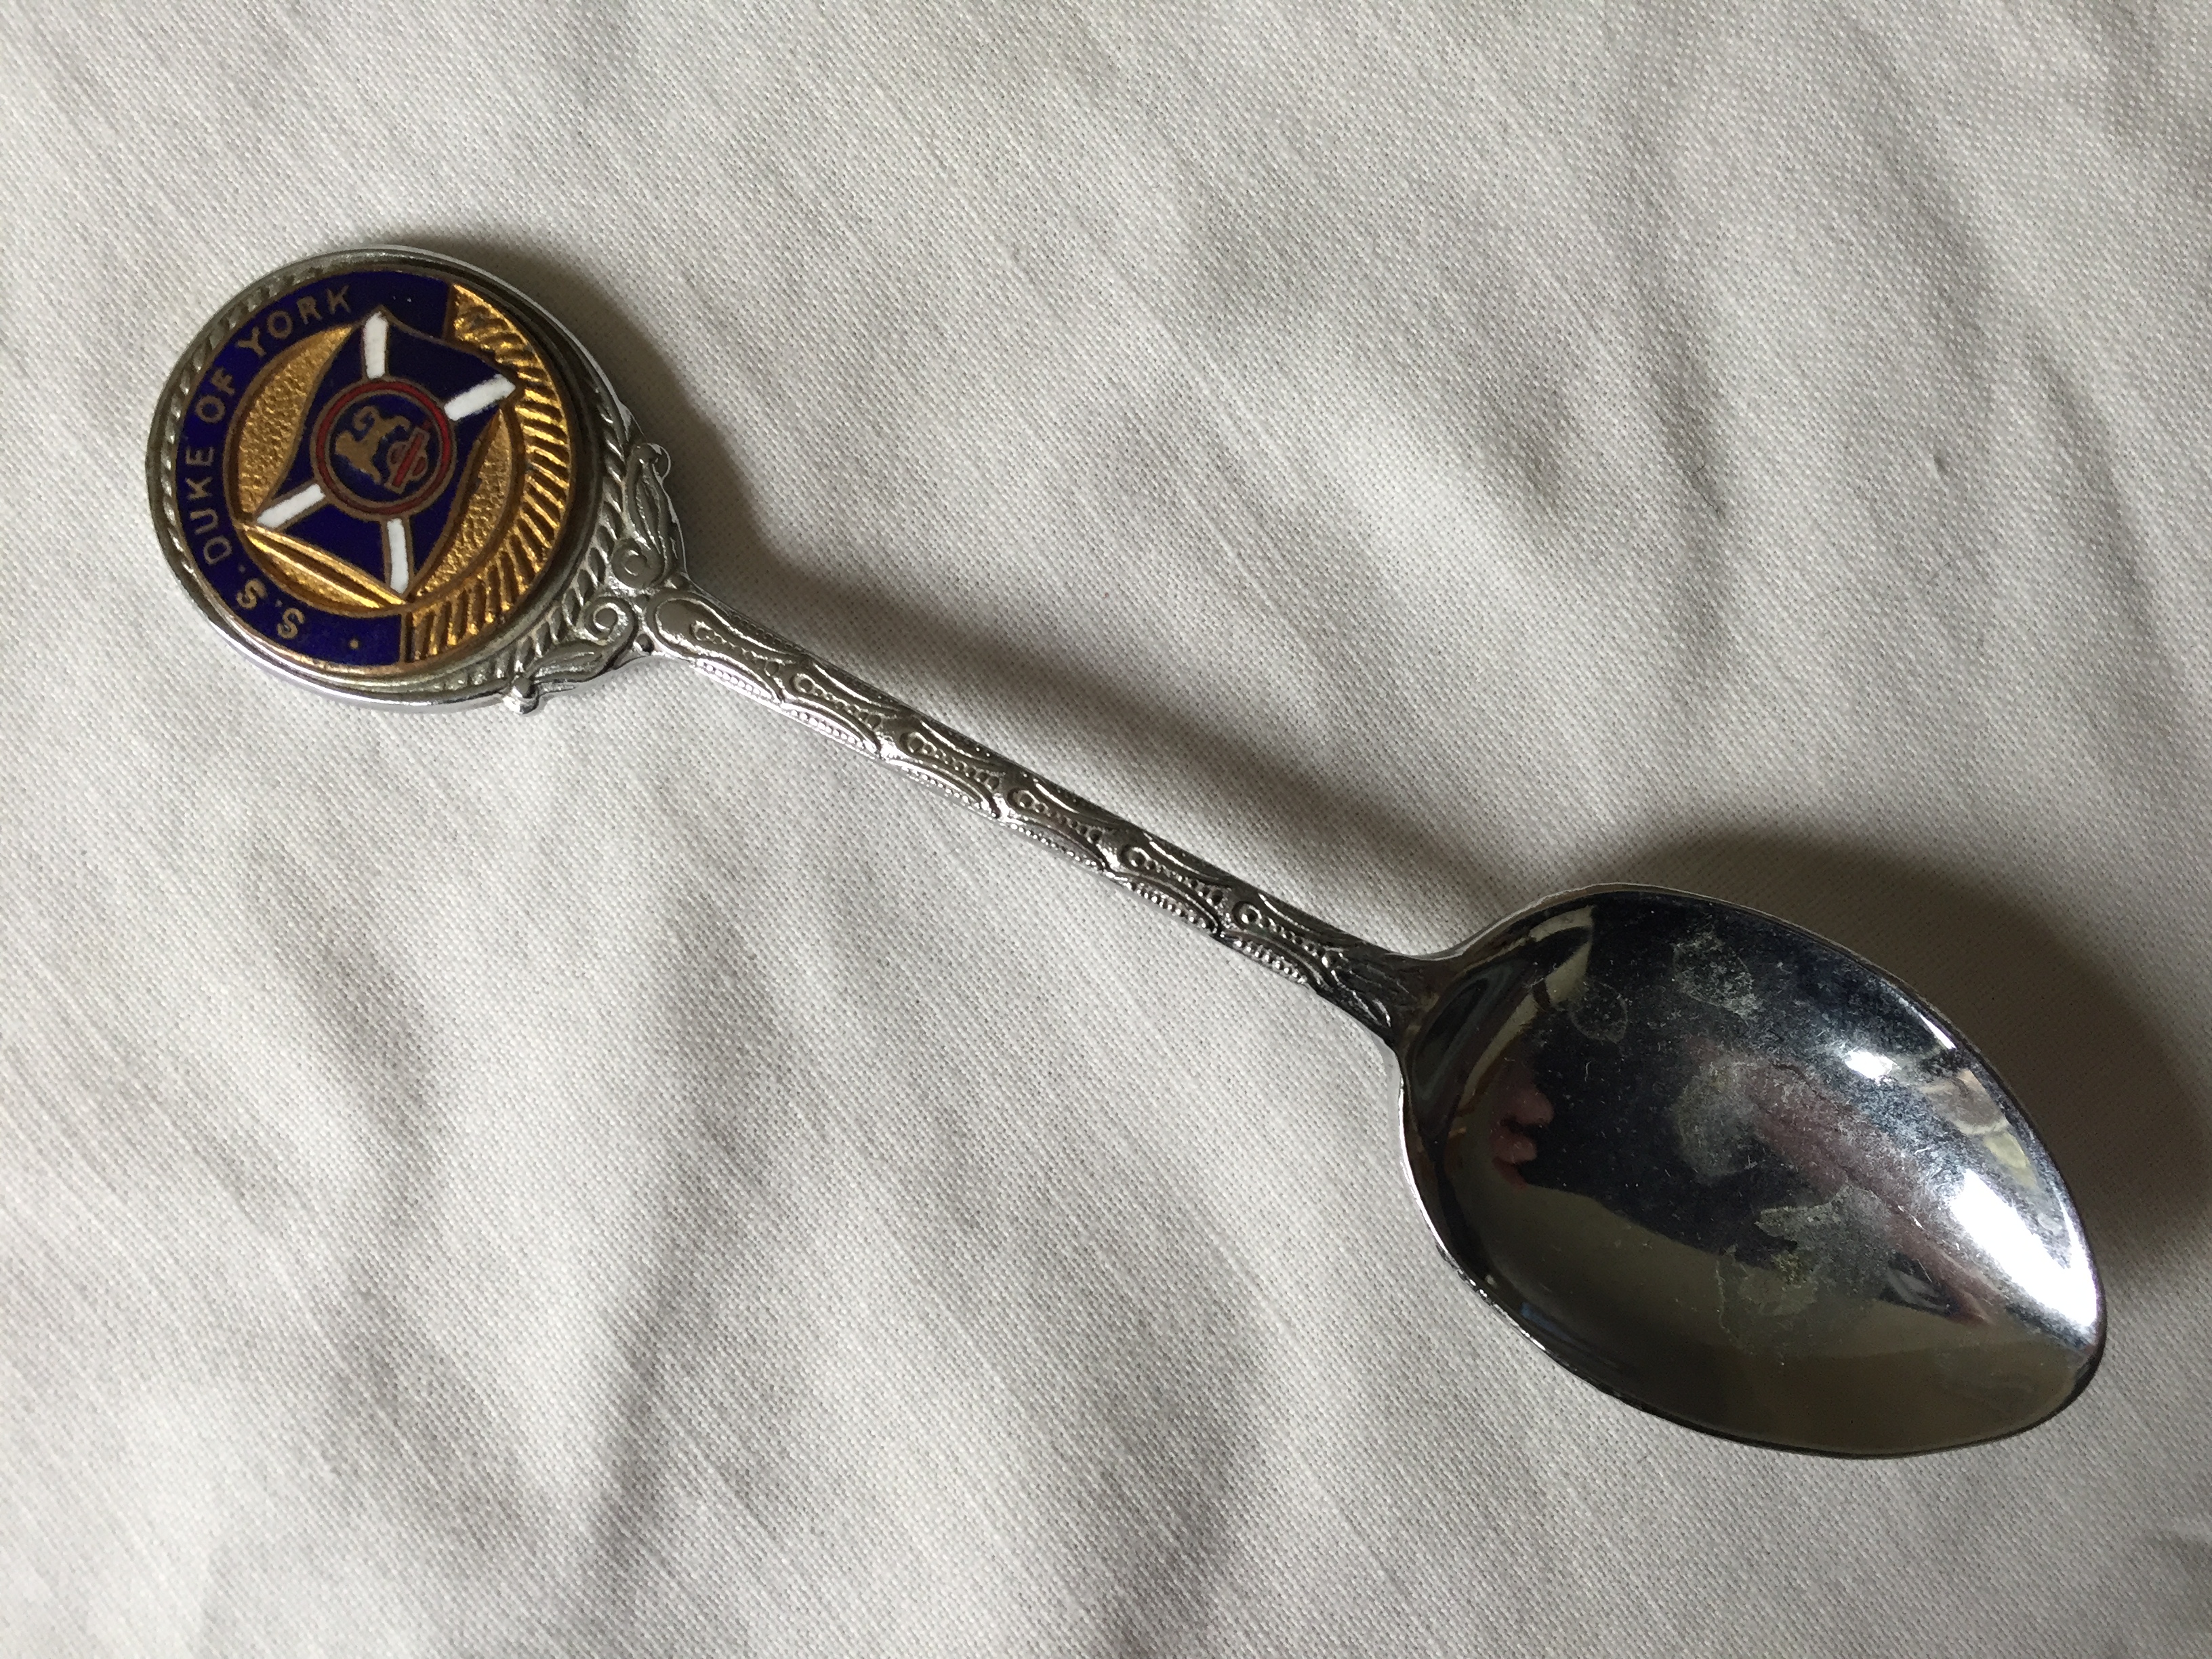 SOUVENIR SPOON FROM THE VESSEL THE SS DUKE OF YORK